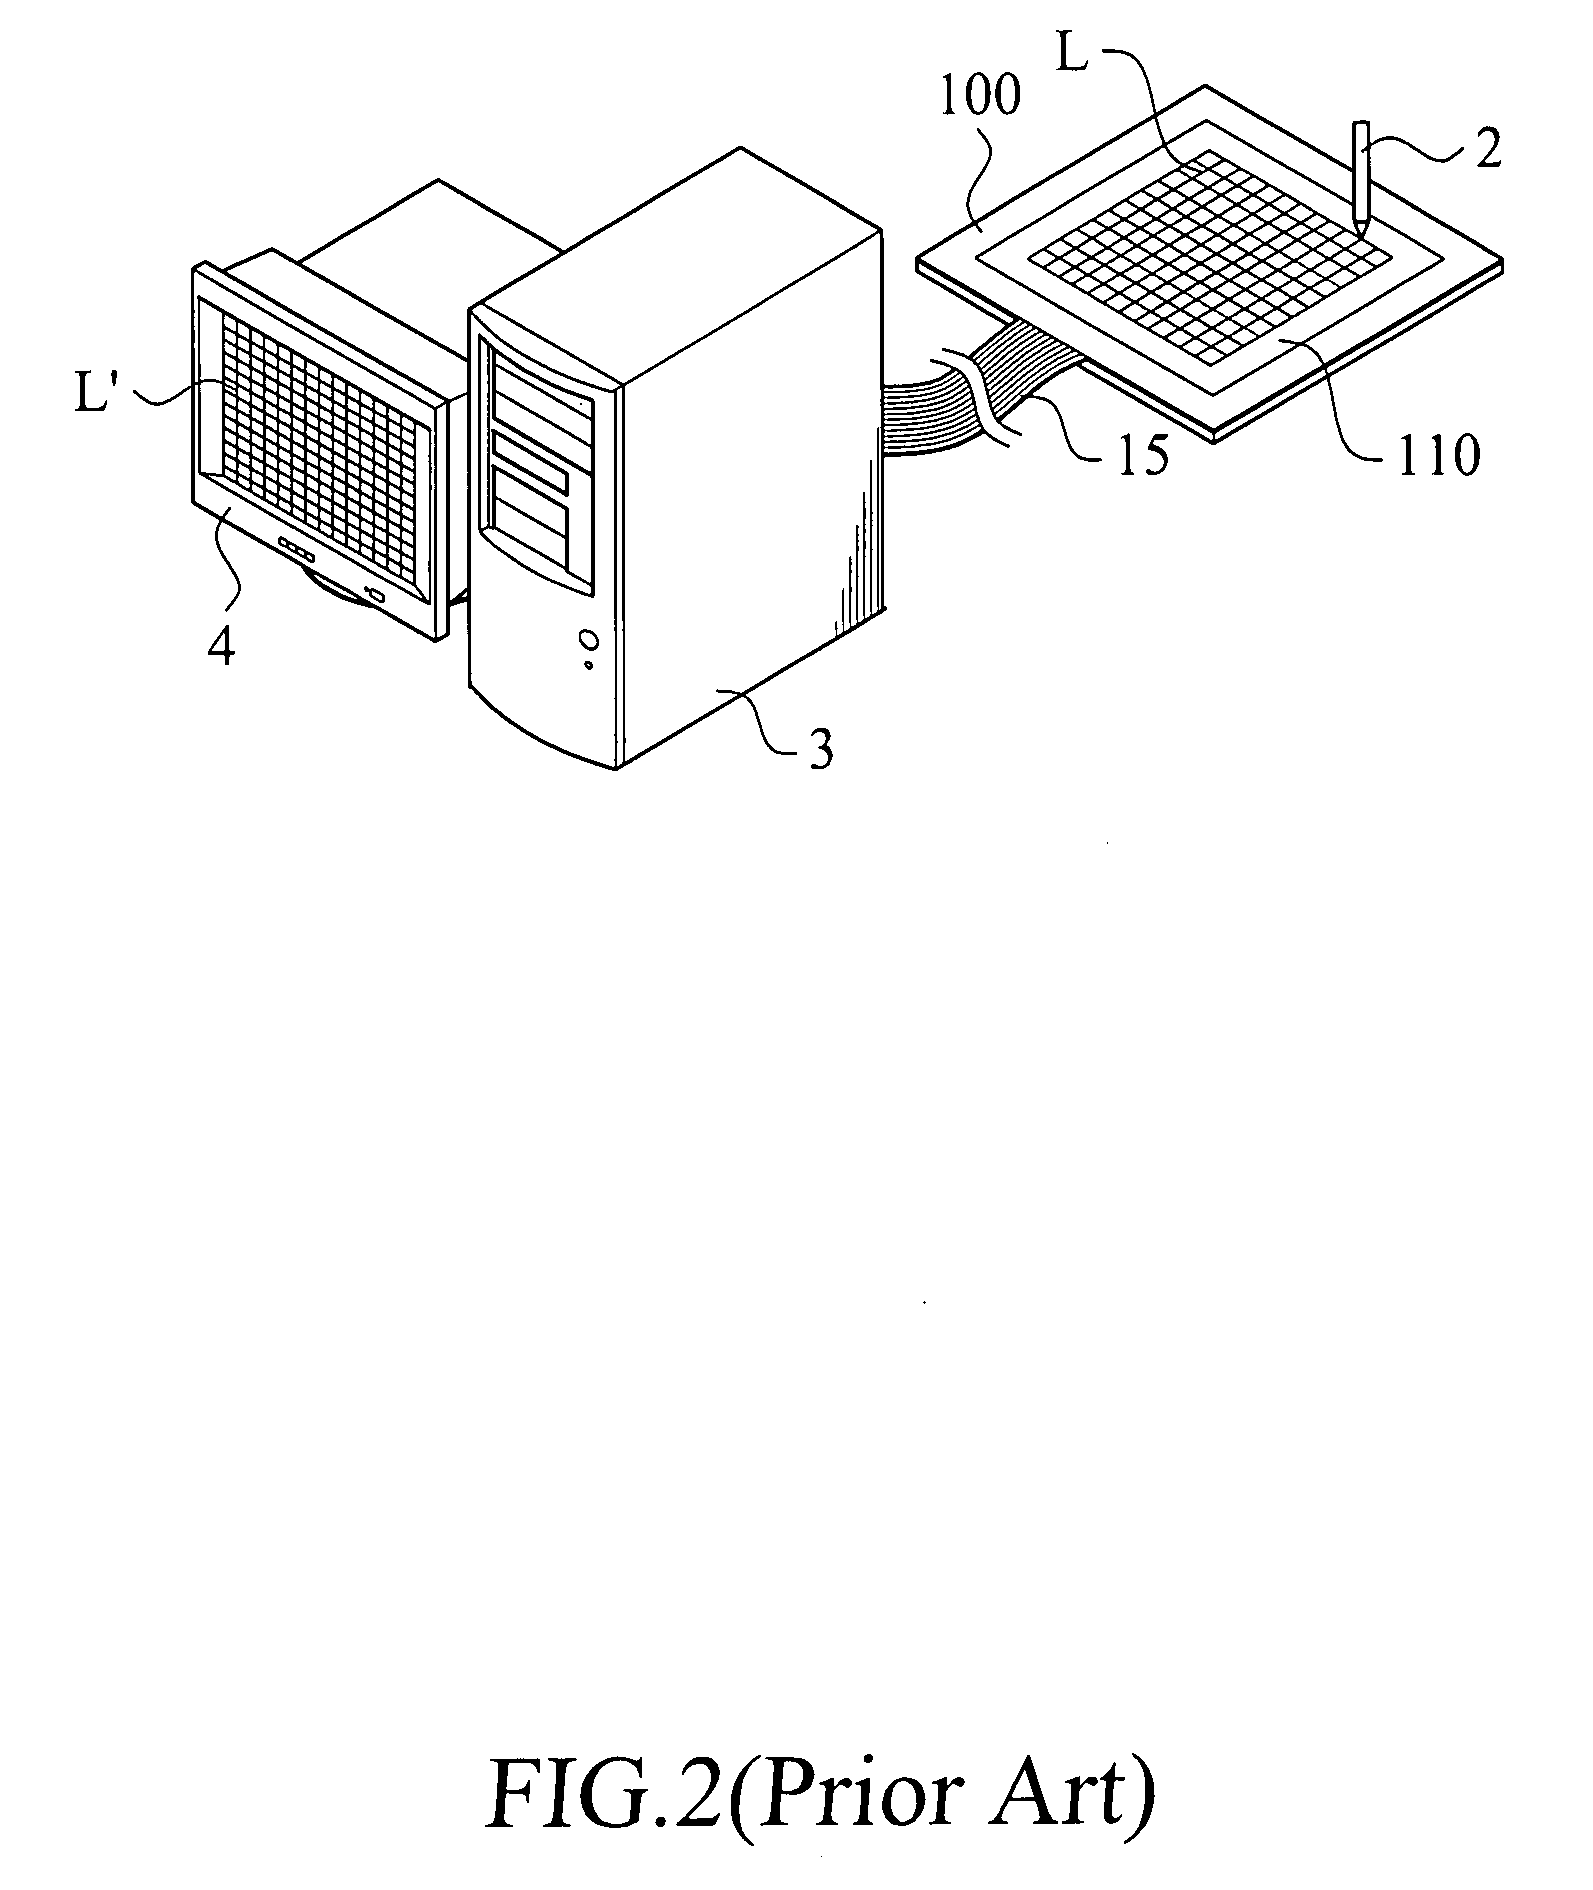 Method and system for carrying out non-contact testing of touch panel